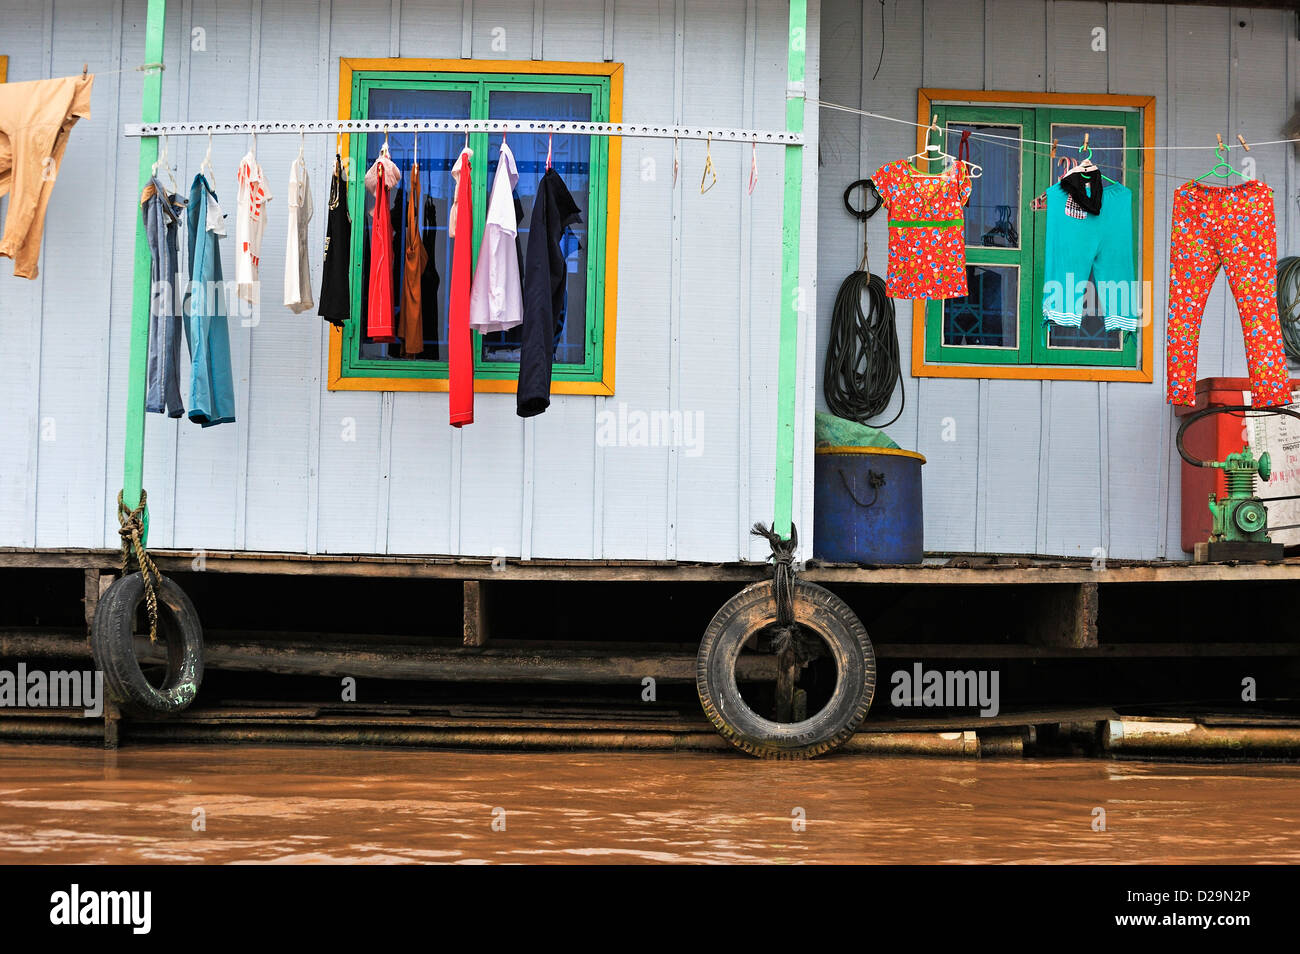 Houseboat with laundry on the Mekong River, Cai Be, Tien Giang Province, Vietnam Stock Photo